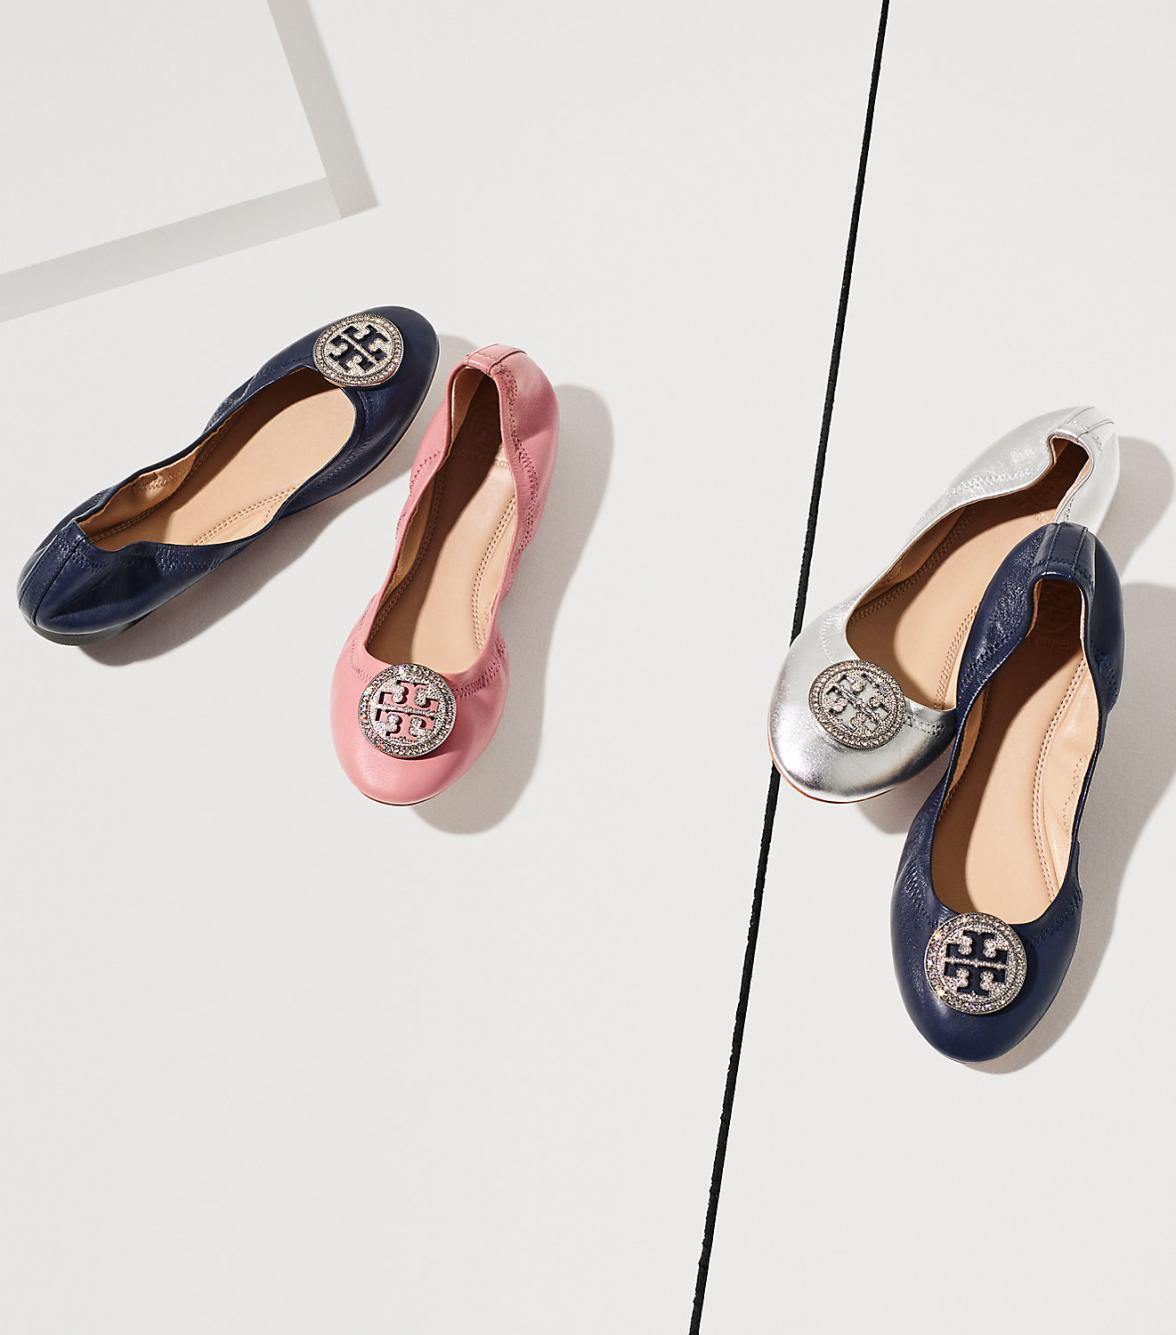 Tory Burch Ballet Flats In Every Color Are on Sale at Nordstrom